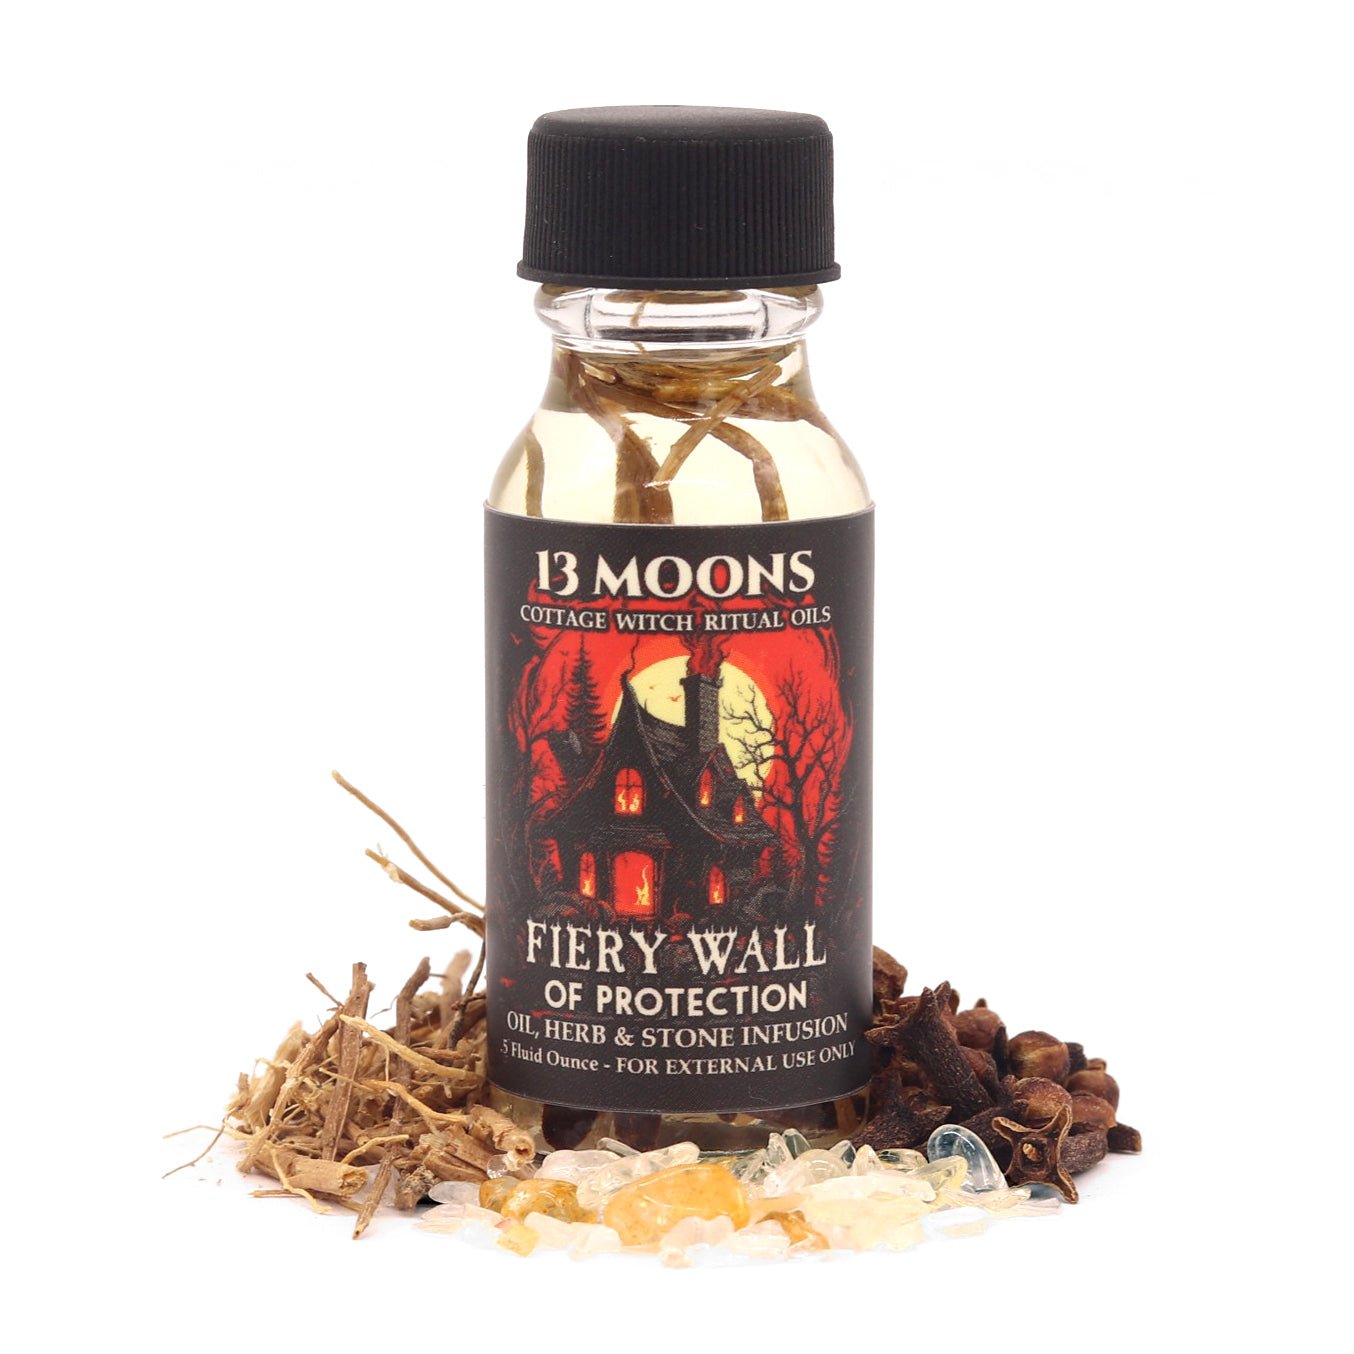 Fiery Wall of Protection Ritual Oil by 13 Moons - 13 Moons